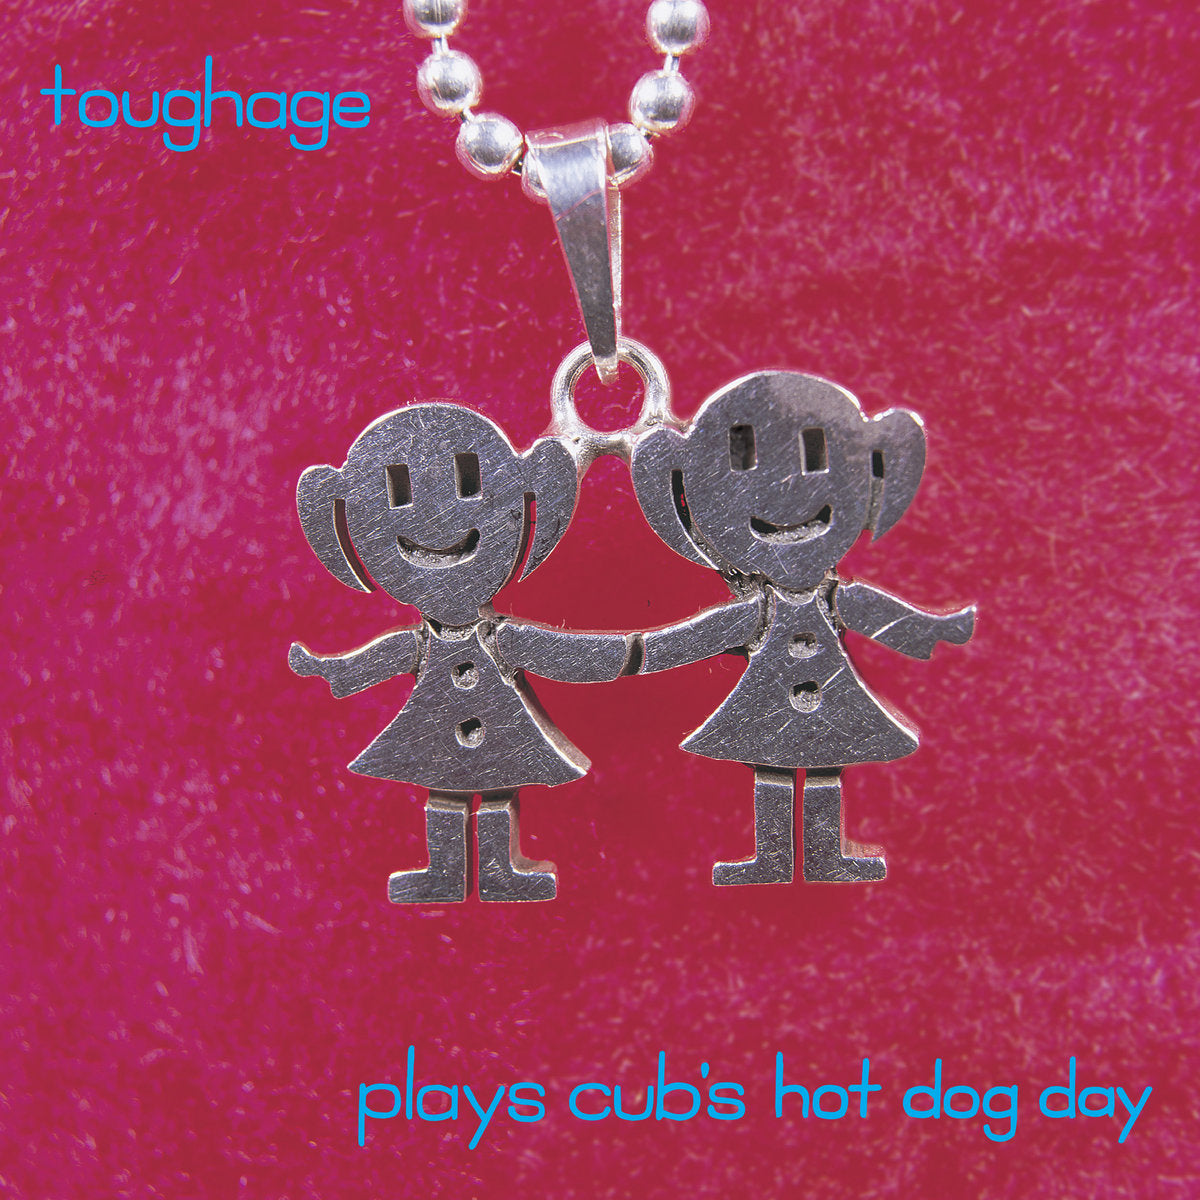 Tough Age "Plays cub's Hot Dog Day" 7" EP (2015)